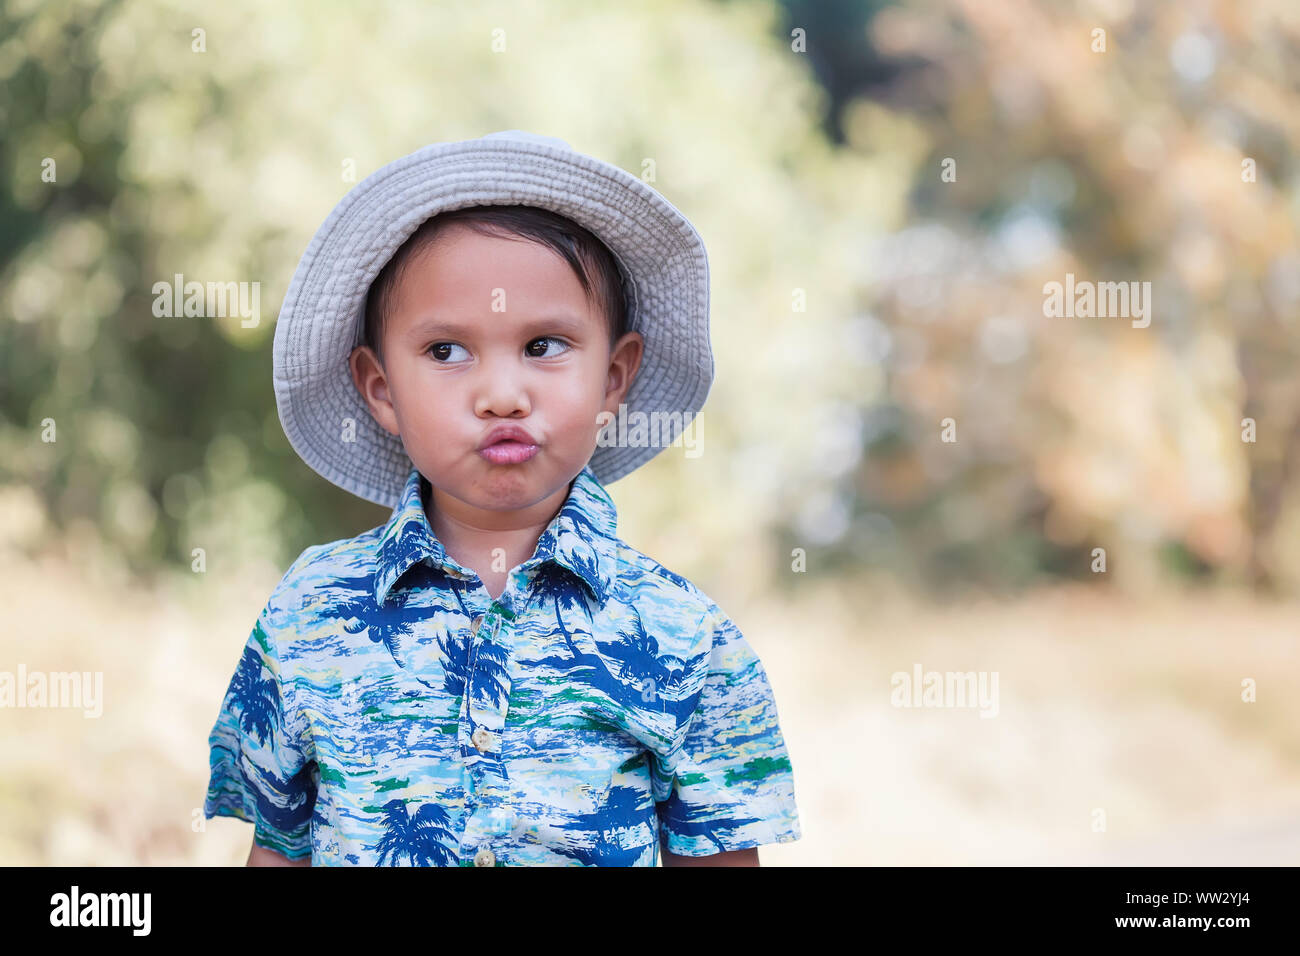 Cute young boy wearing a tropical print shirt and hat who is blowing kisses while looking away to the distance. Stock Photo